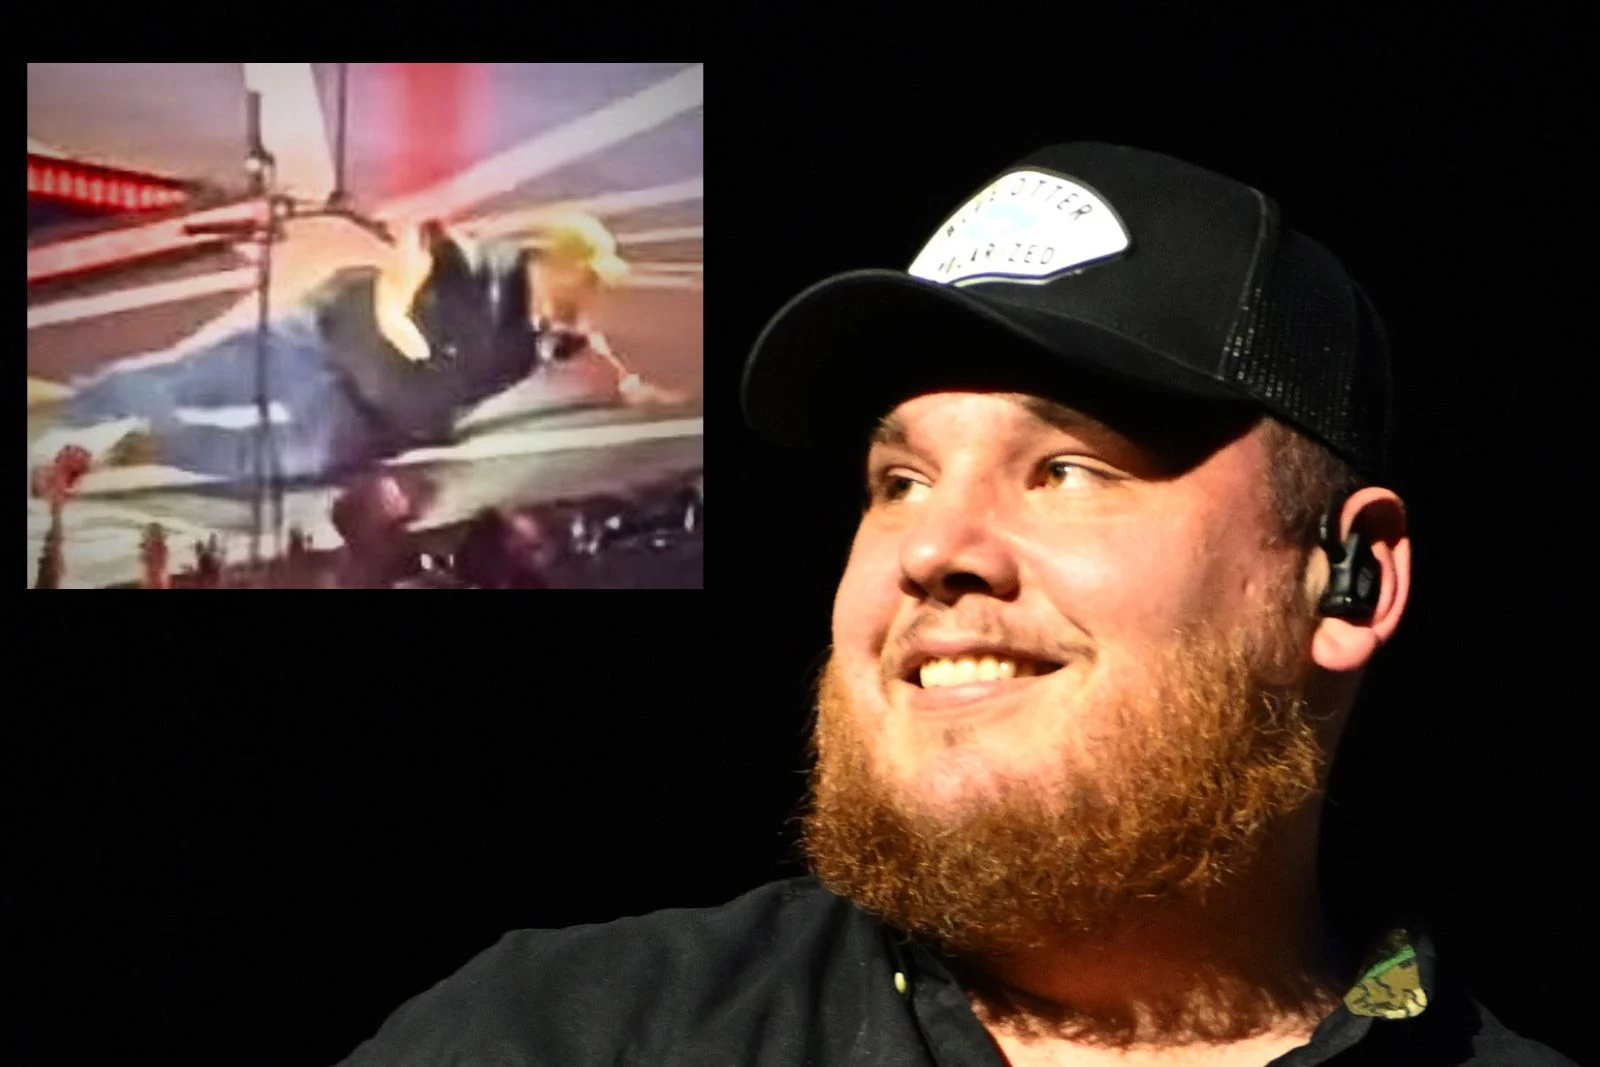 Luke Combs Falls on Stage, Hilariously Declares Himself Safe